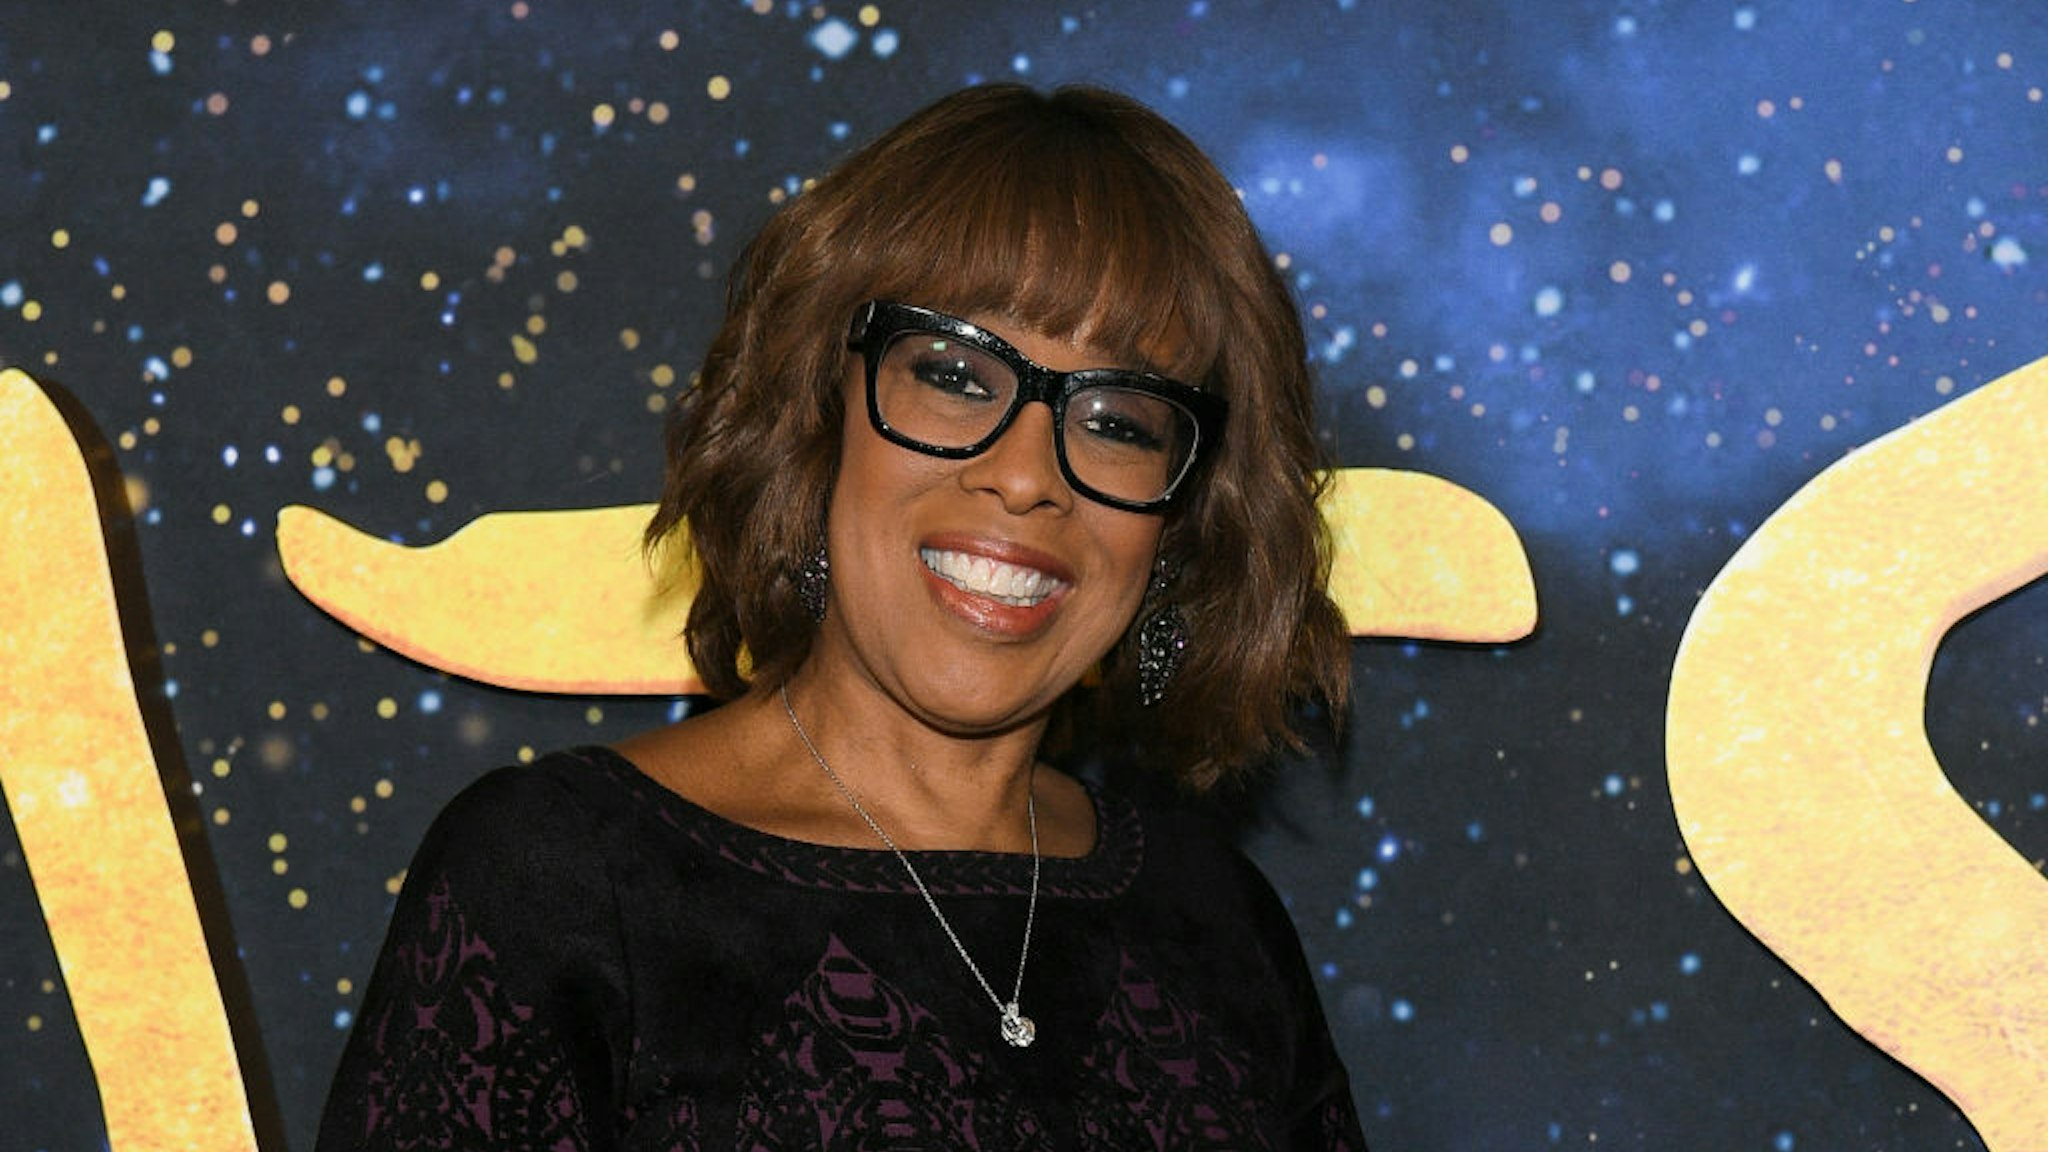 Gayle King attends the world premiere of "Cats" at Alice Tully Hall, Lincoln Center on December 16, 2019 in New York City. (Photo by Dia Dipasupil/Getty Images)